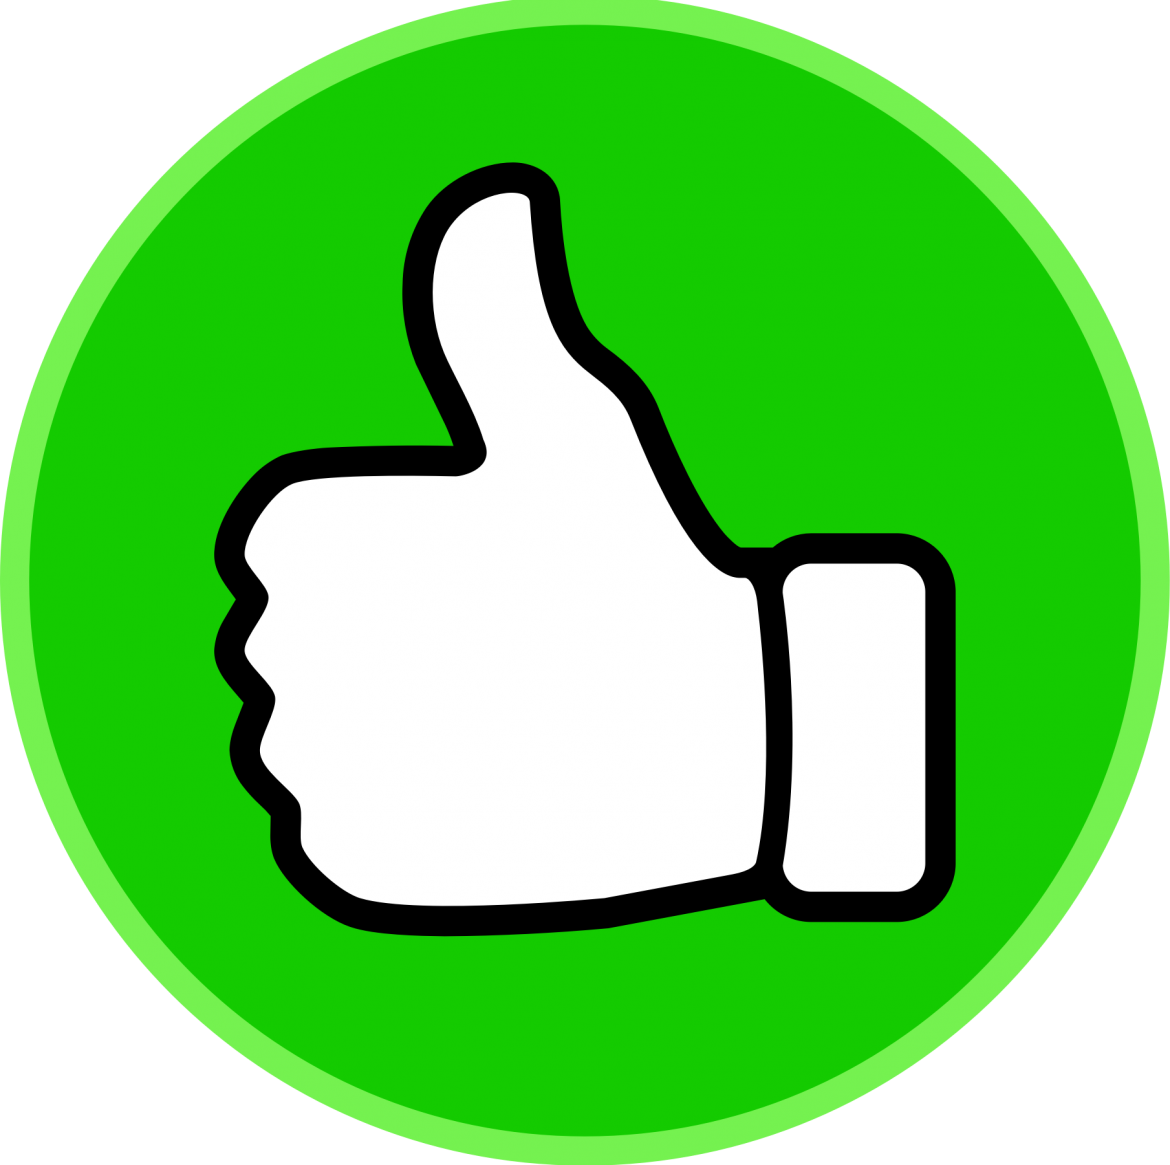 thumbs up clipart in green circle #40364